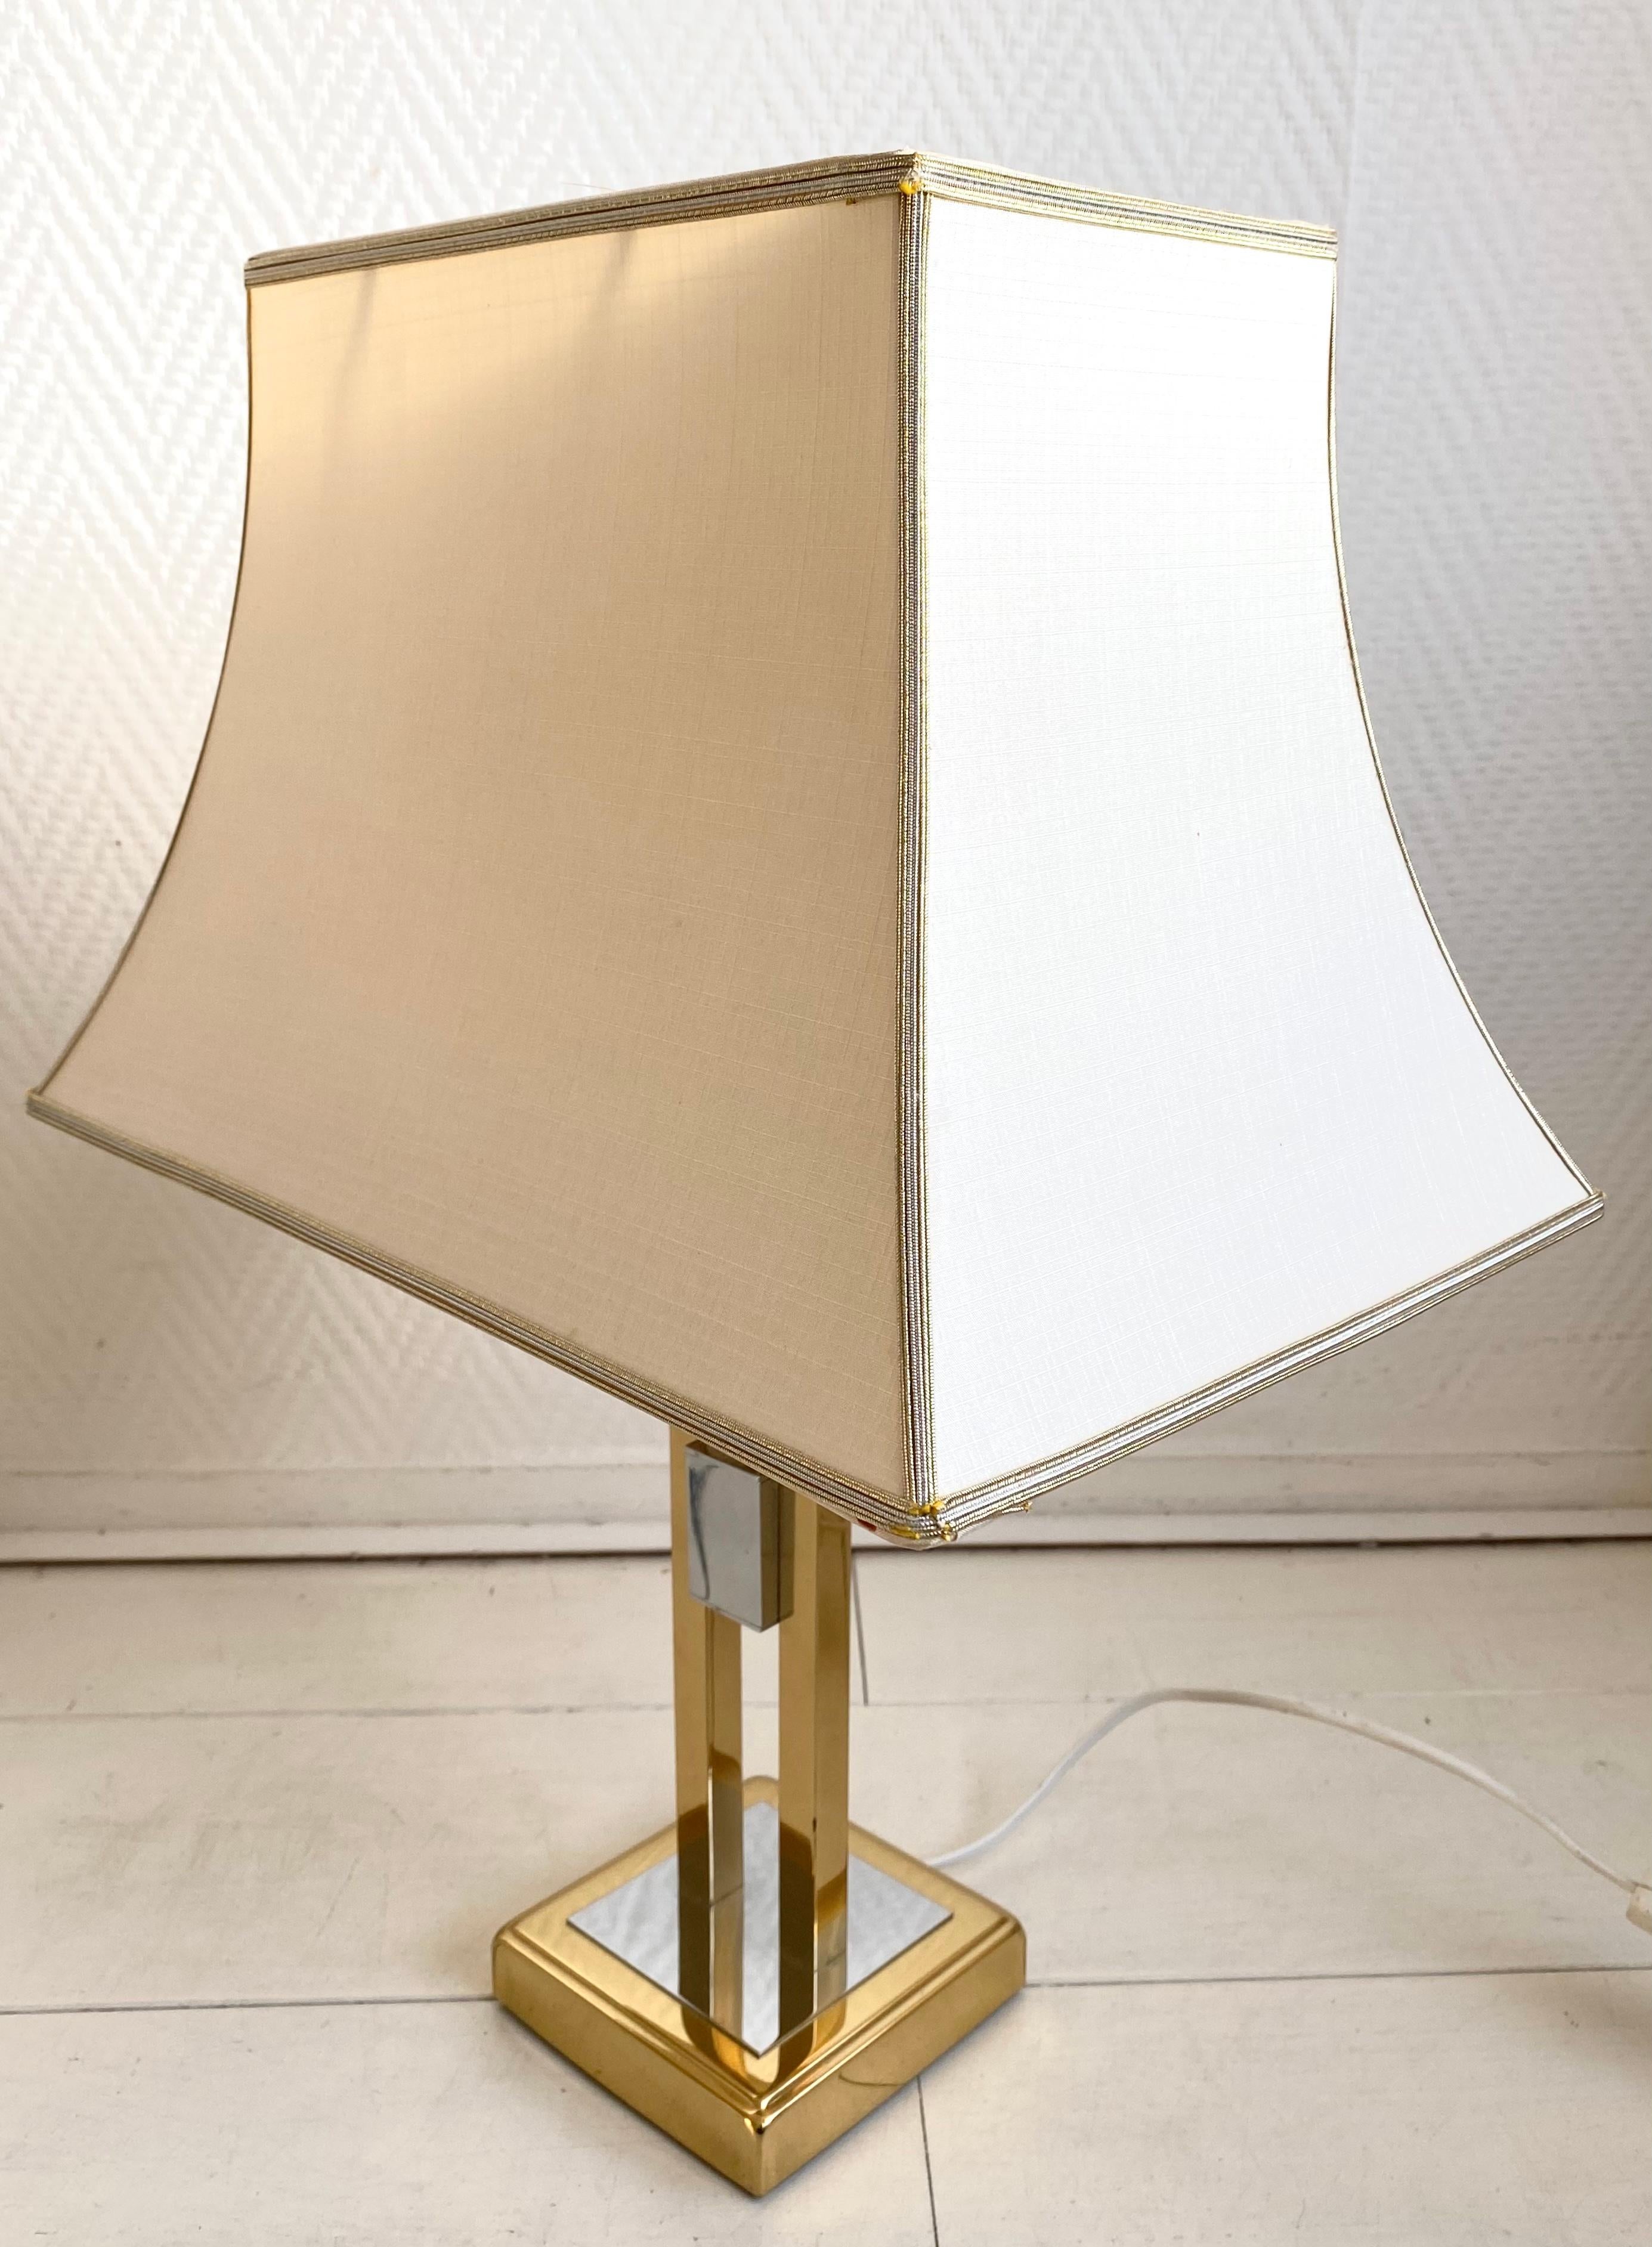 Gorgeous, Bi-color, sky-scraper table lamp attr. To Herda Holland. Very nice piece with original, shade. The shade has light wear as two slight stains. Gorgeous piece.